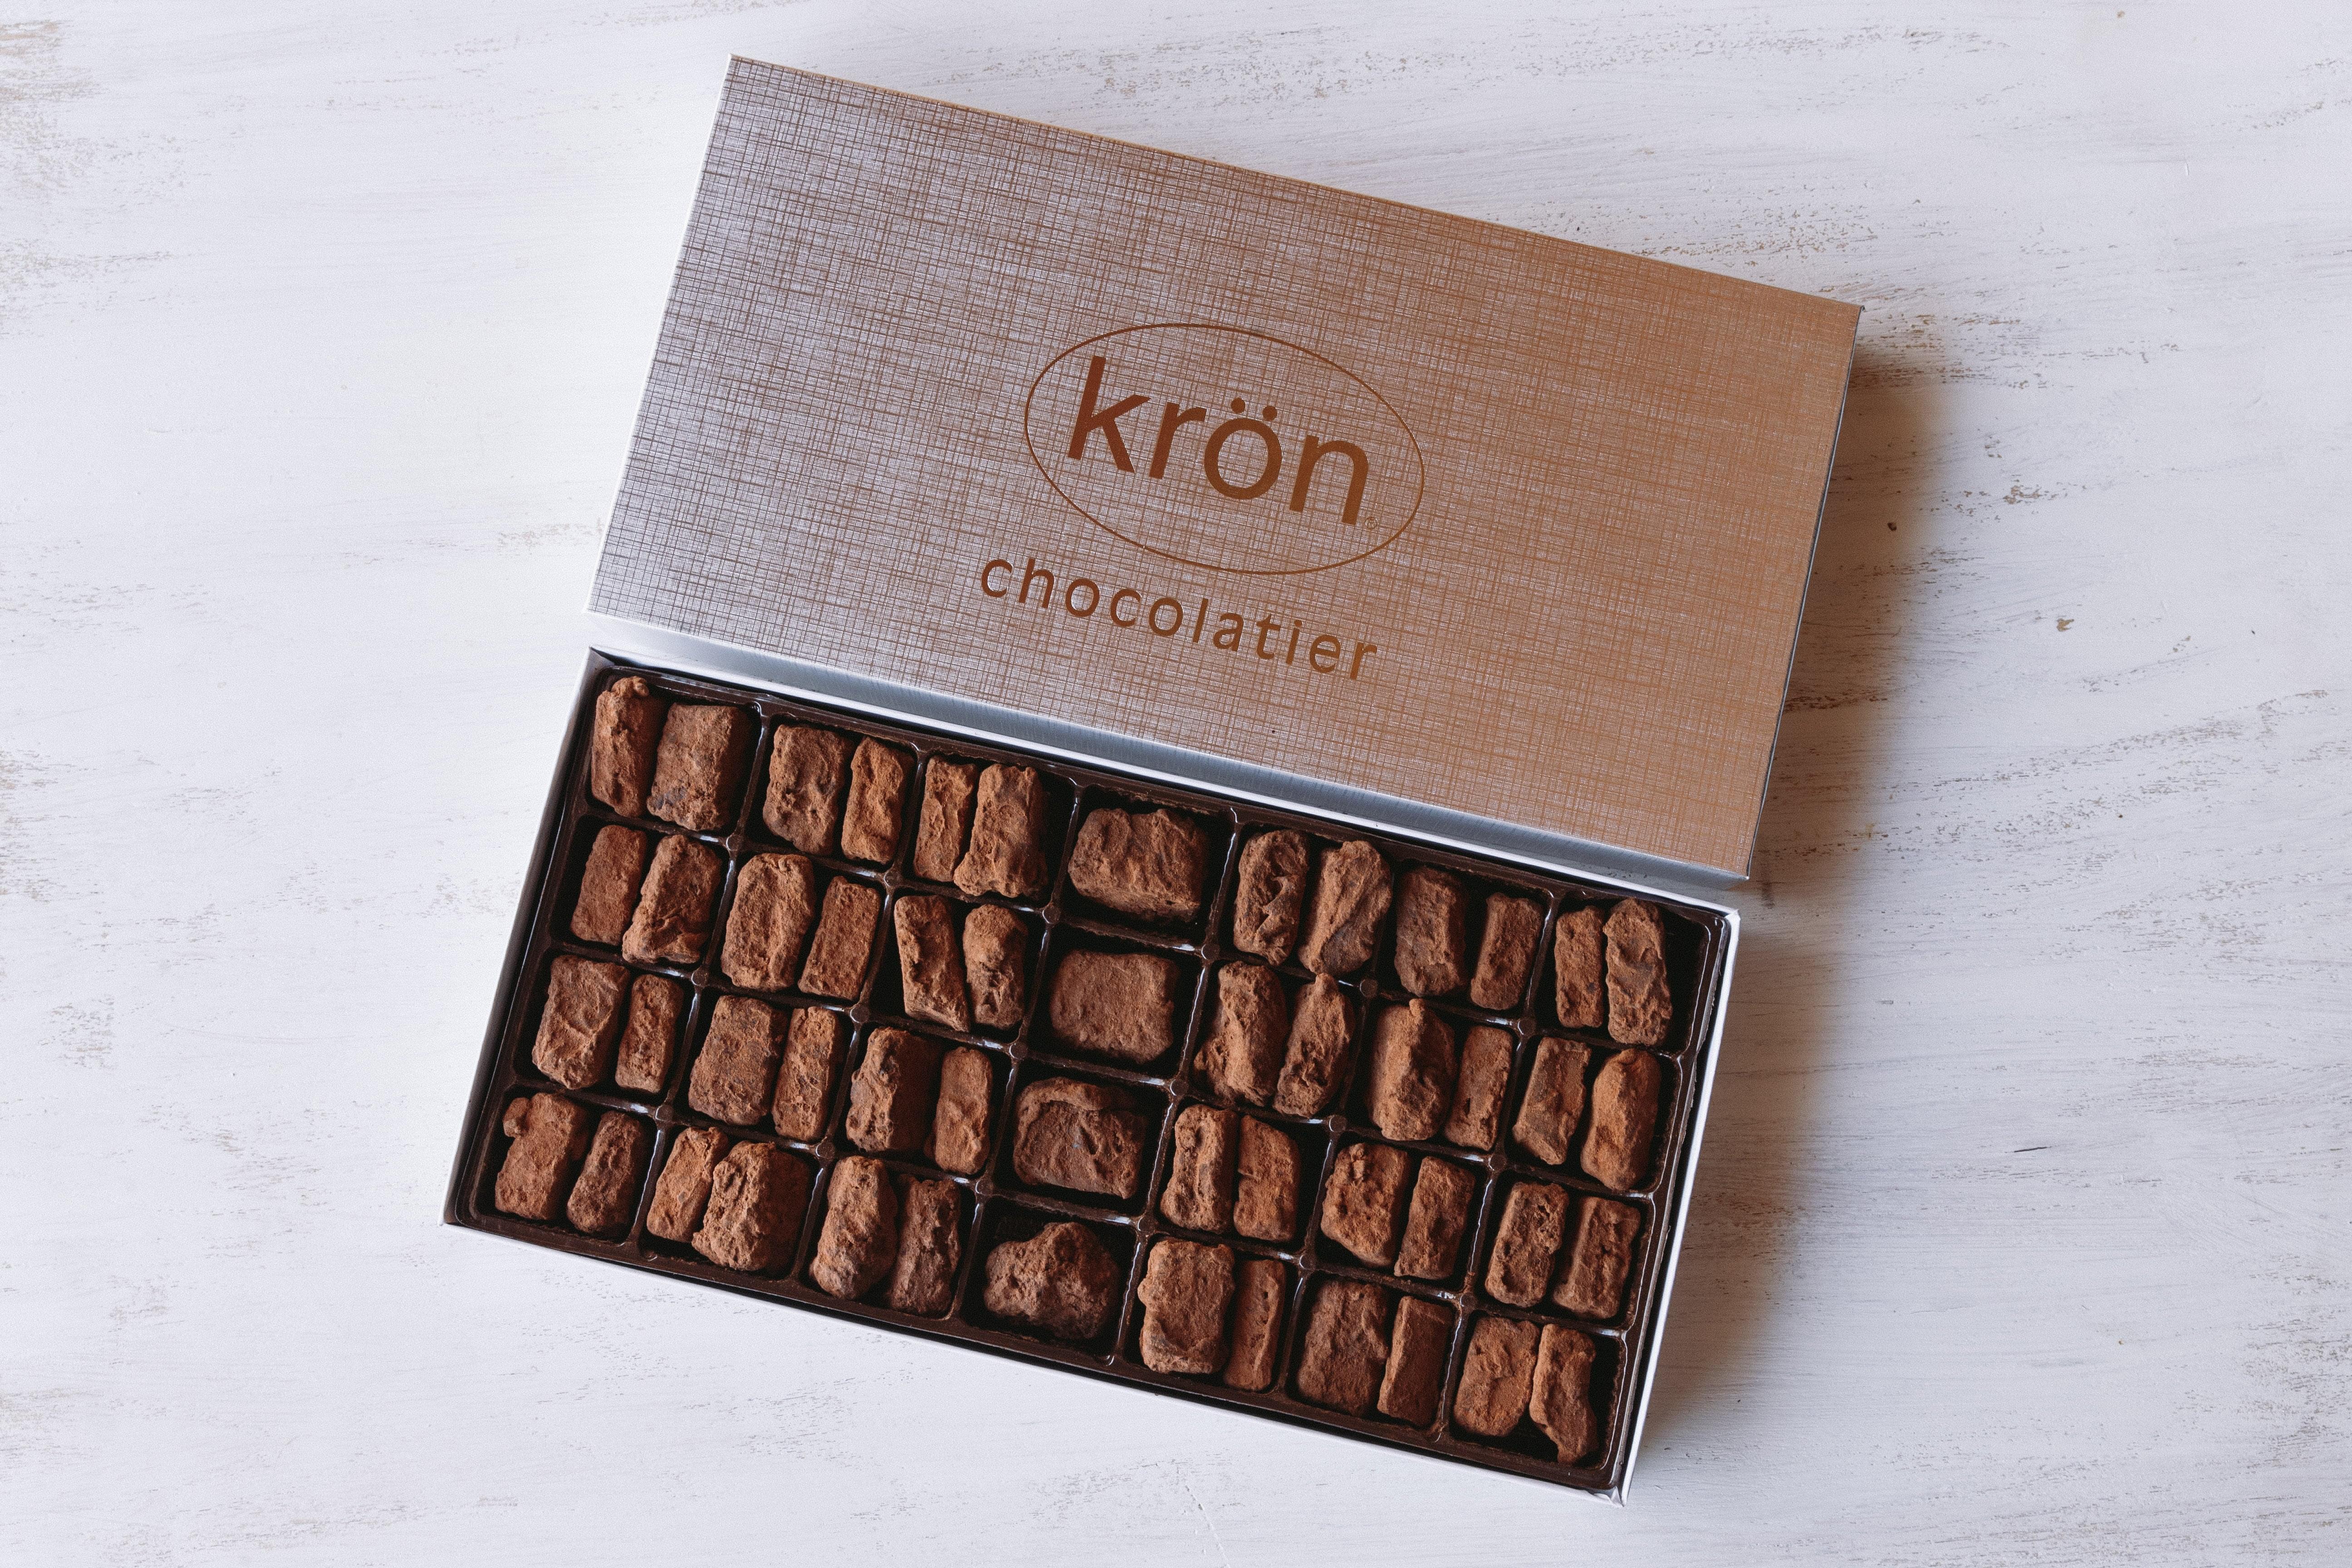 New Baby Chocolate Gifts: Chocolate Gifts for New Parents – Shop